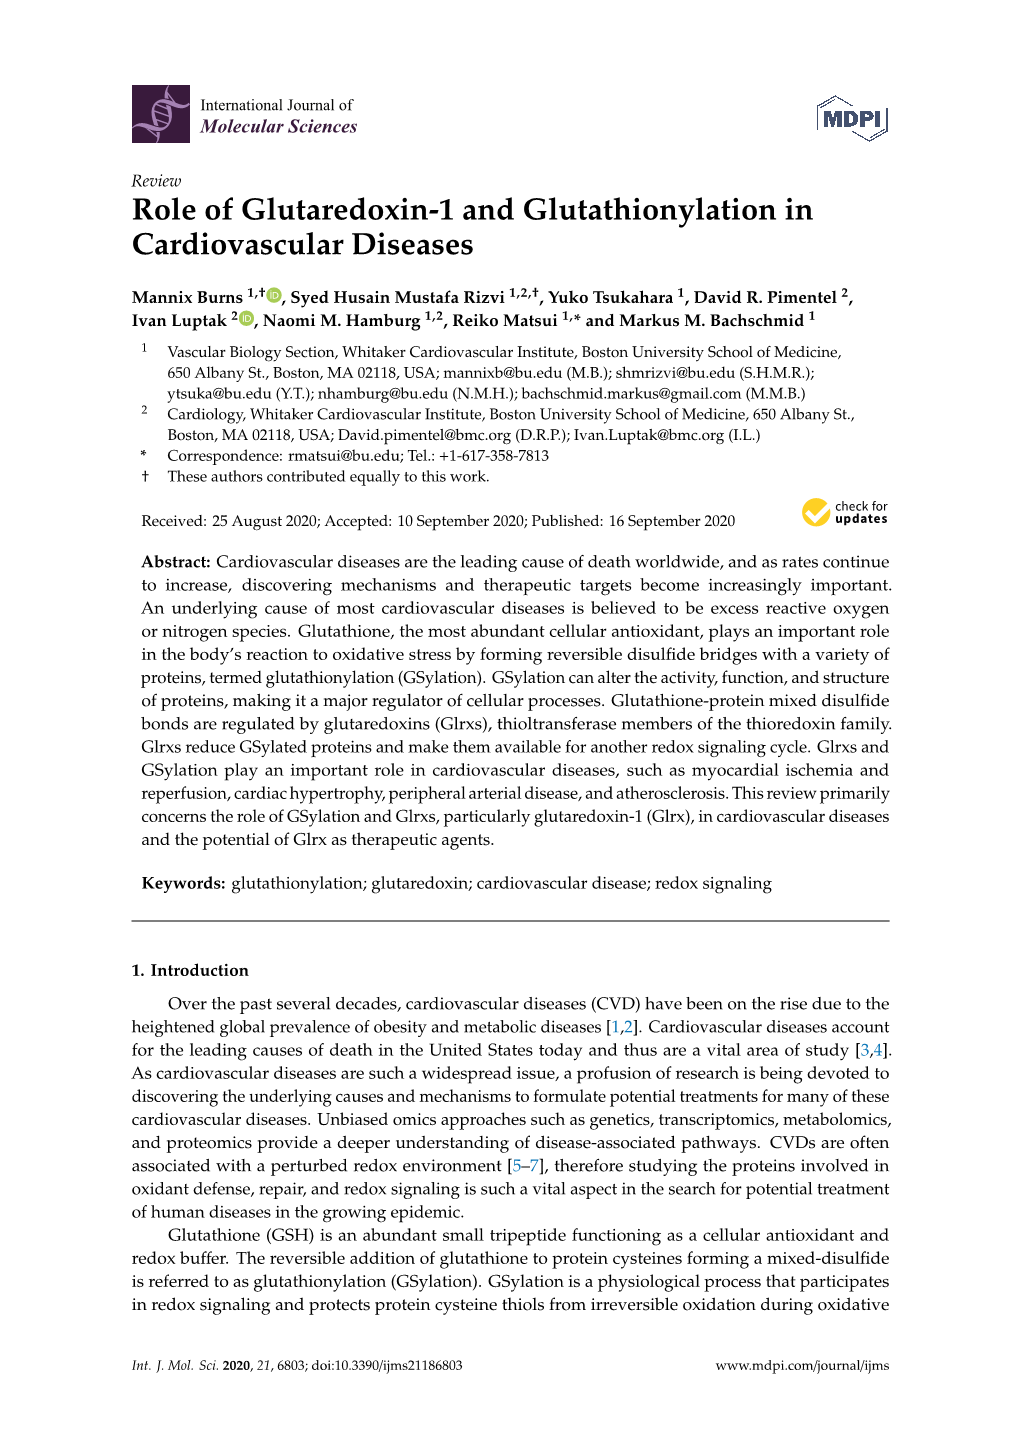 Role of Glutaredoxin-1 and Glutathionylation in Cardiovascular Diseases